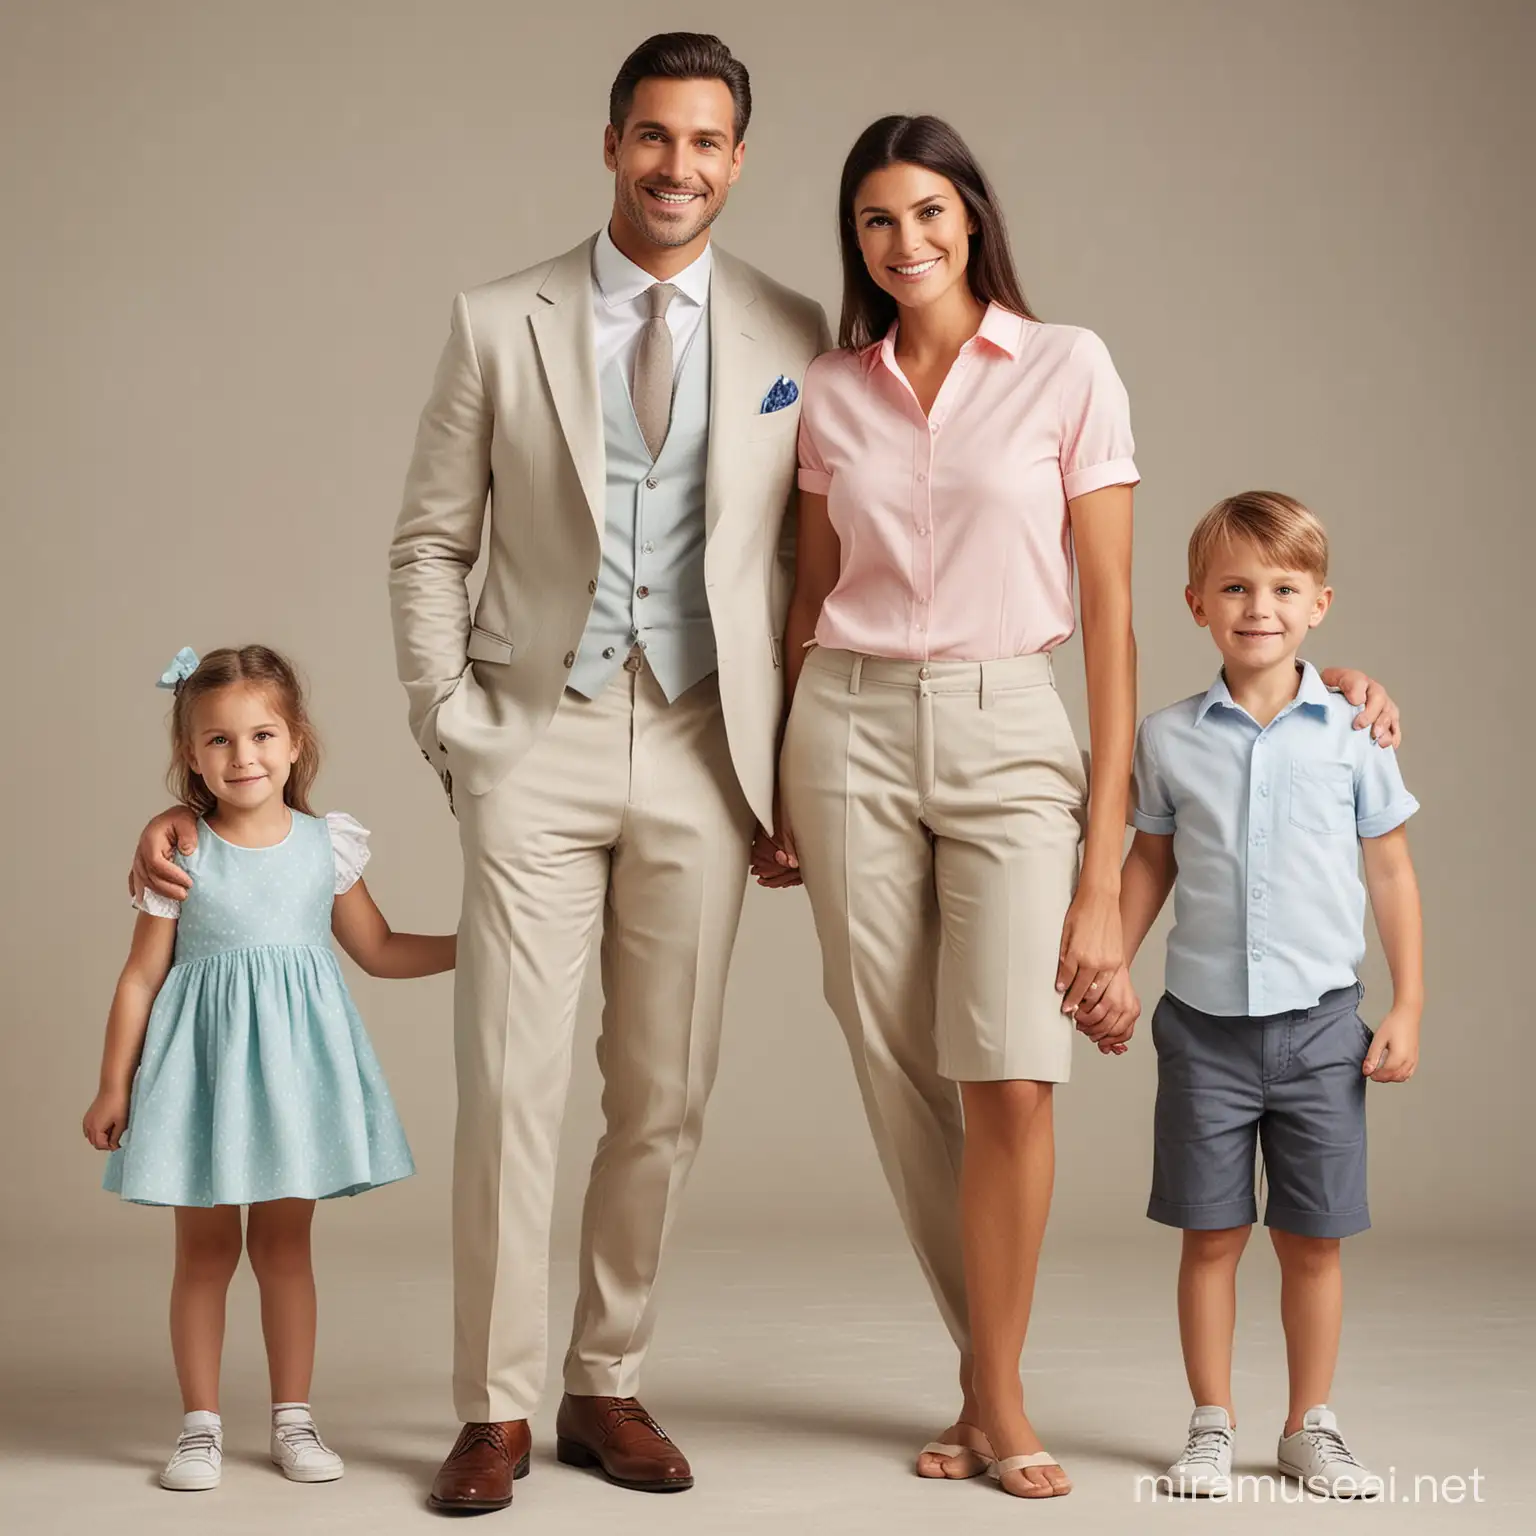 Stylish Family Portrait Handsome Man with Wife and Children in Elegant Attire